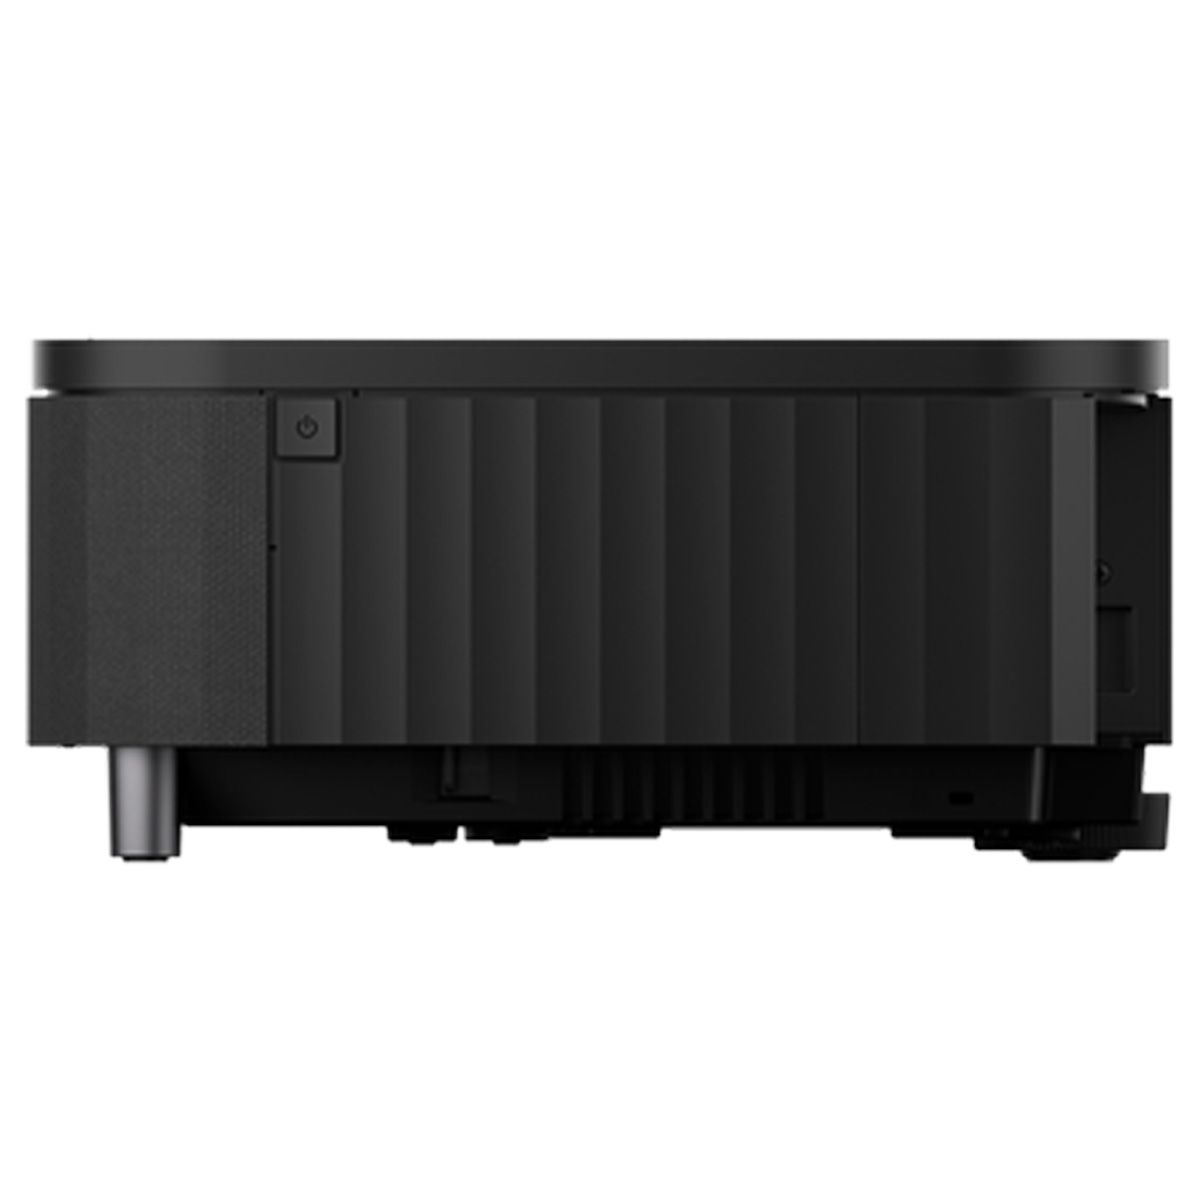 Epson LS800 UST Projector - Black - side view with power button